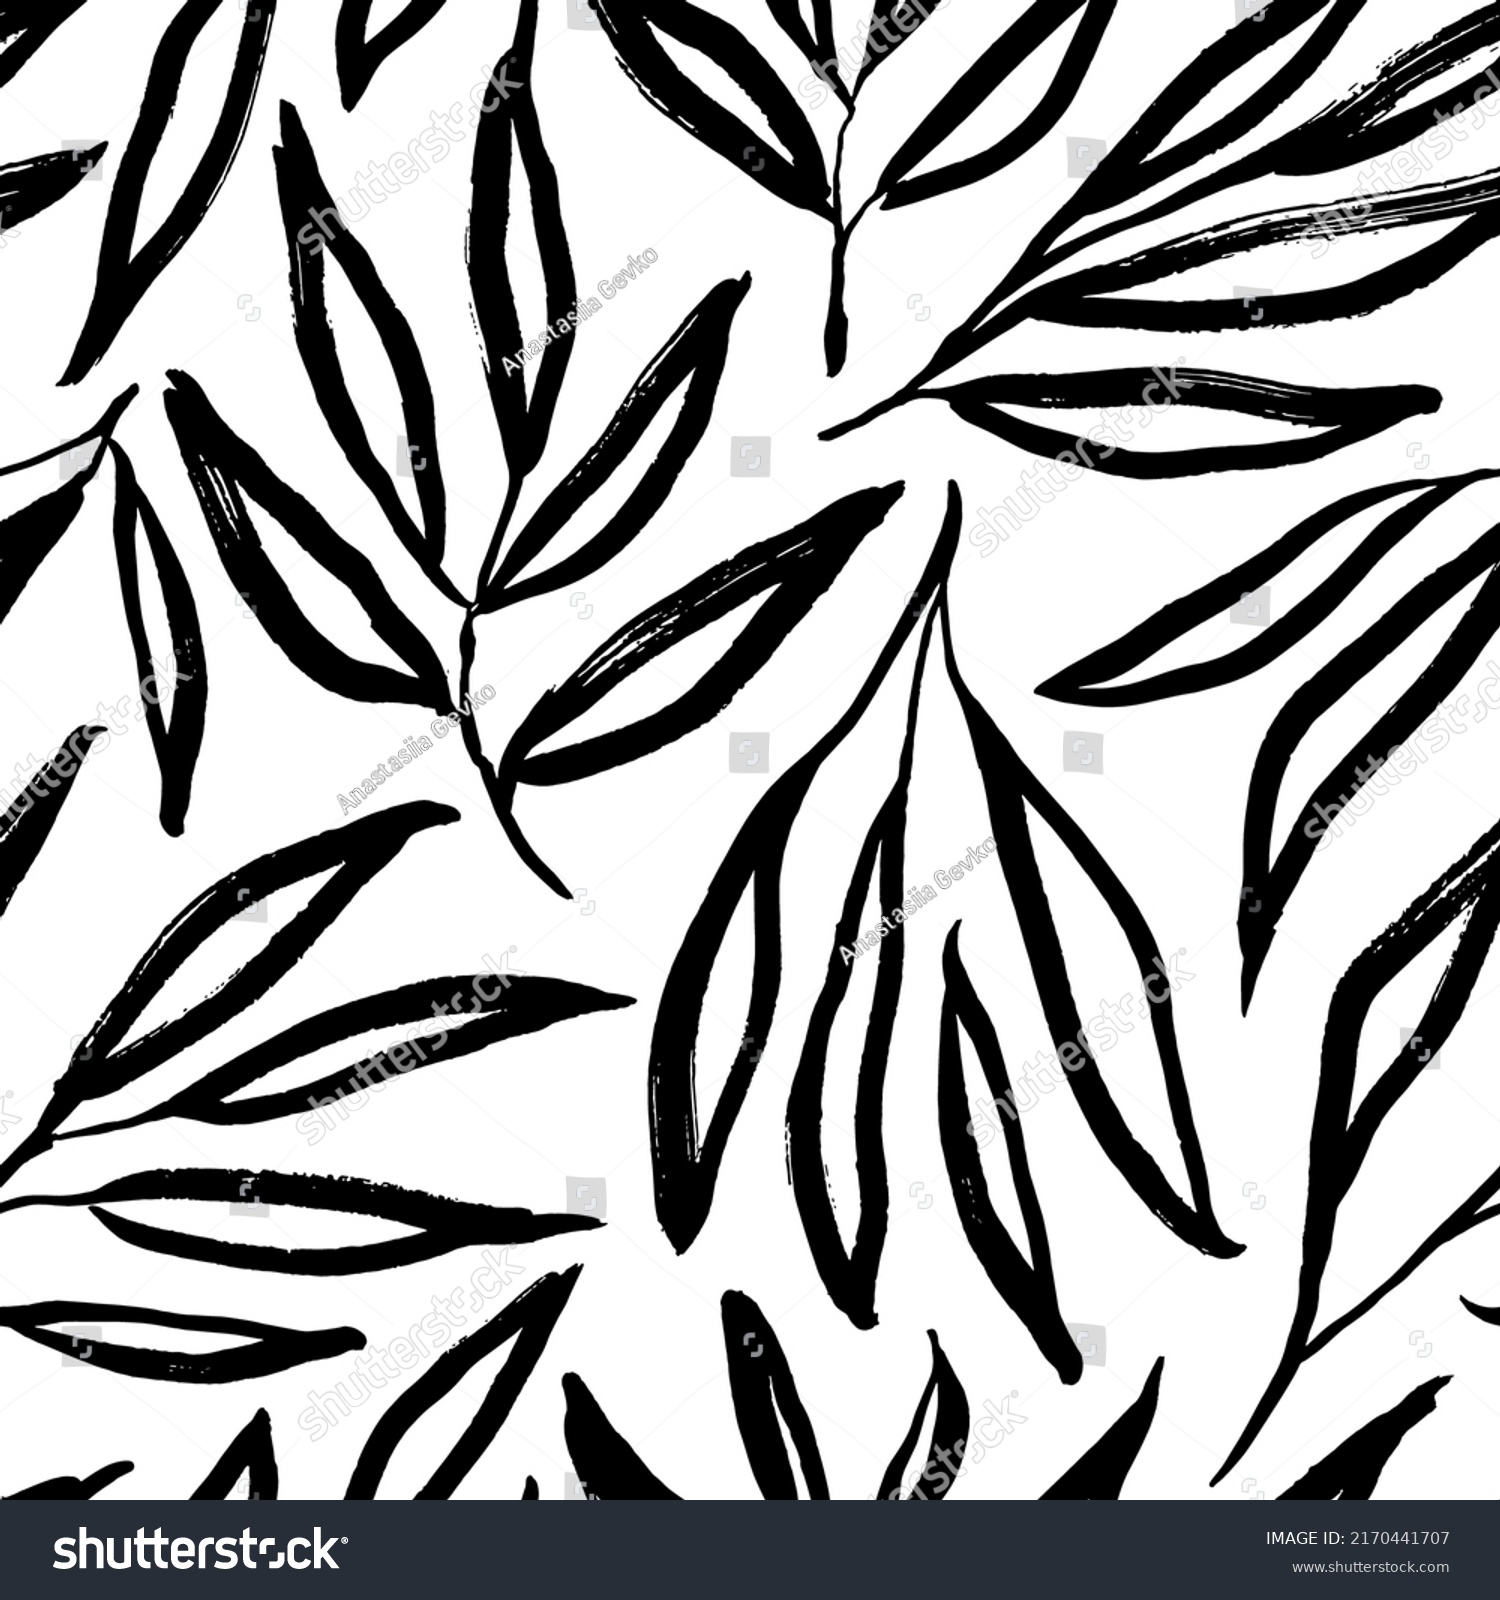 SVG of Abstract outlined leaves and branches seamless pattern. Hand drawn black brush painted plants. Vector foliage silhouettes. Natural organic ornament with black branches. Botanical seamless background  svg